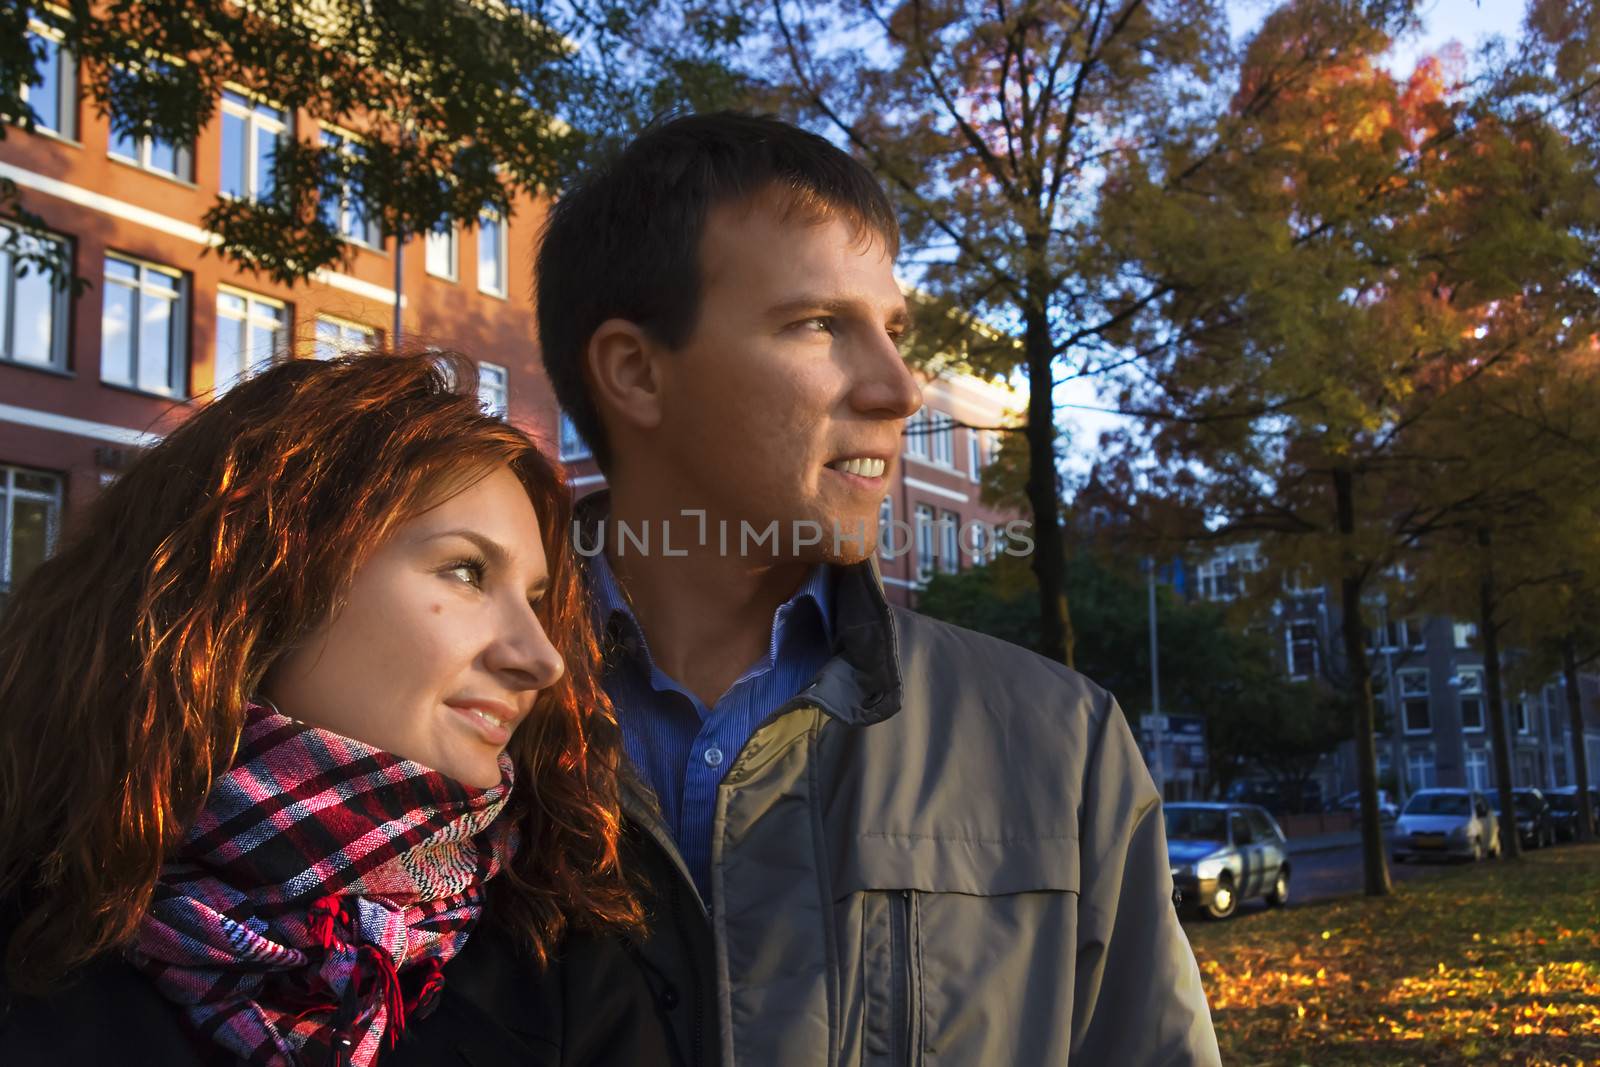 Outdoor happy couple in love posing against autumn Amsterdam bac by Tetyana